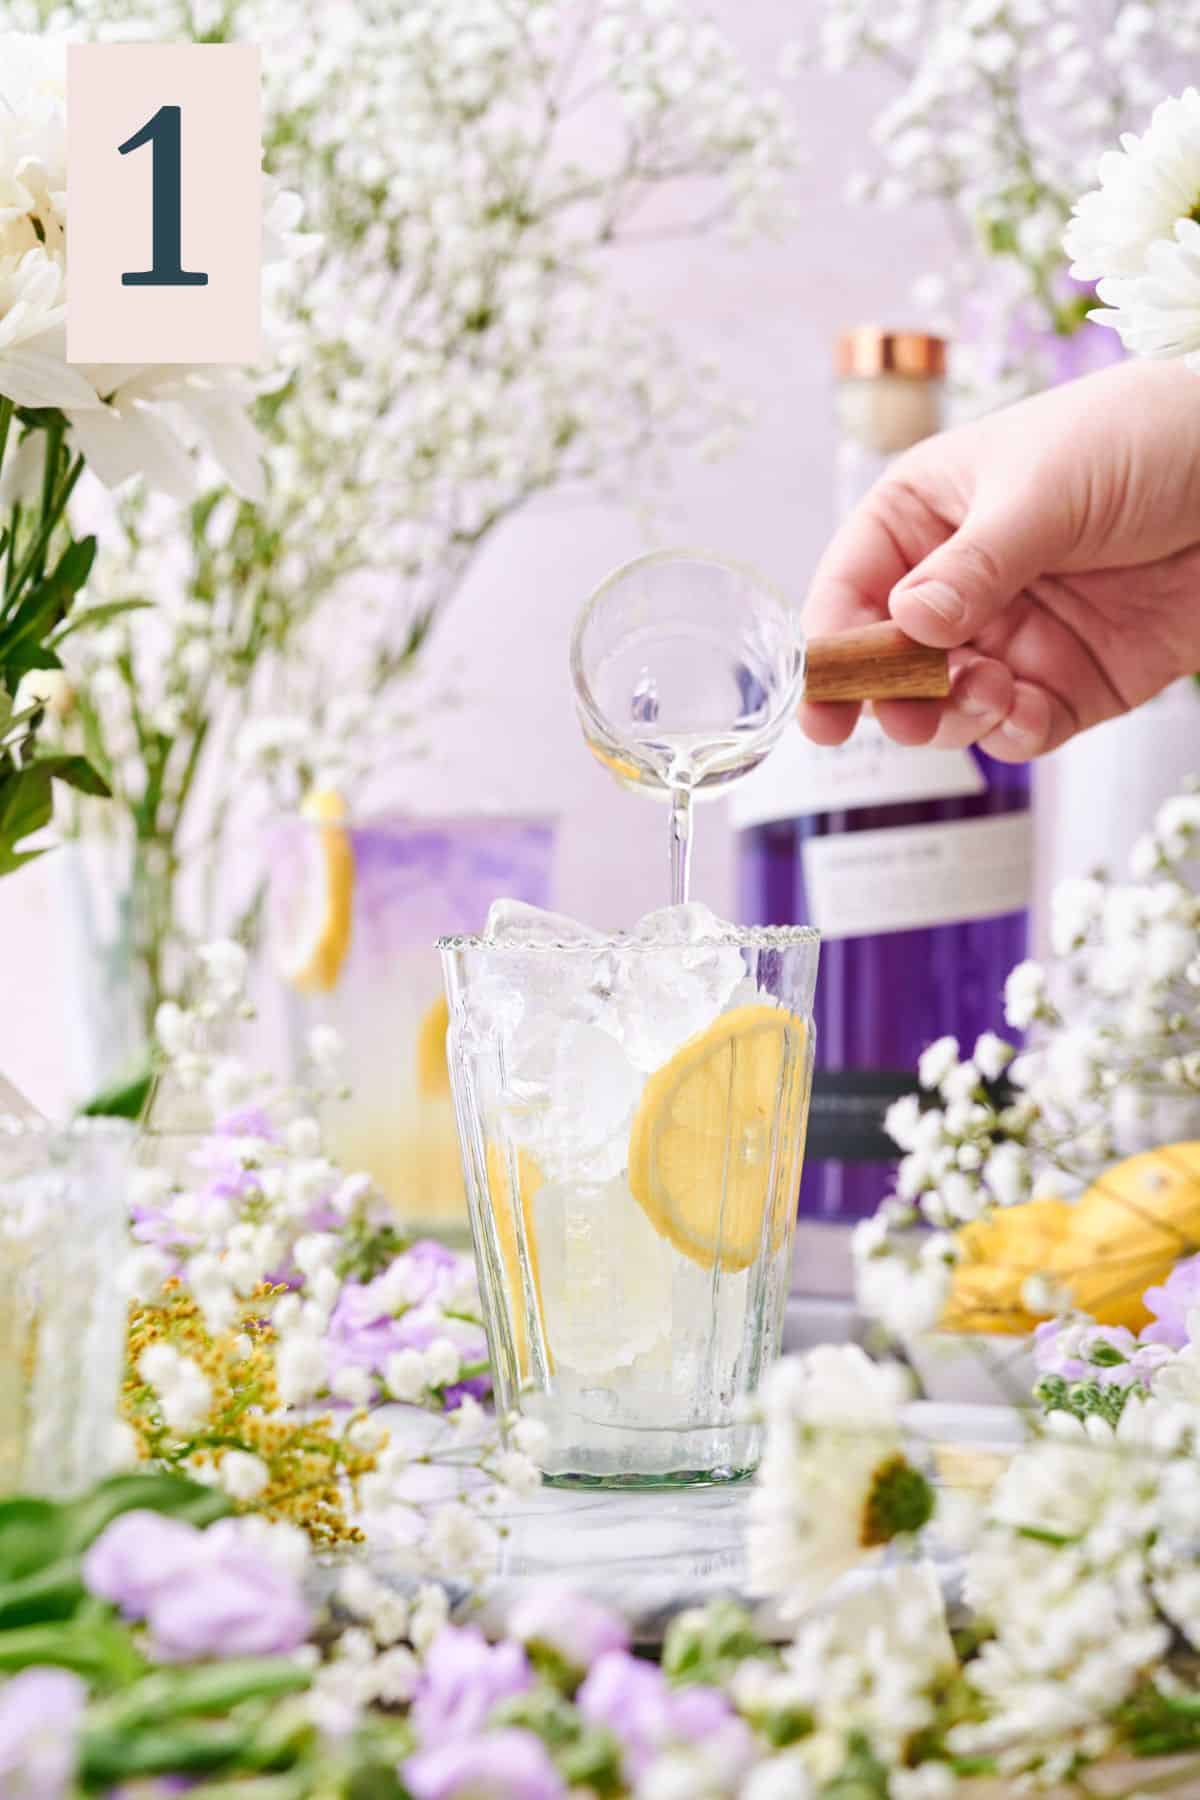 hand pouring simple syrup into a glass with lemon wheels and ice surrounded by lots of white and purple flowers.